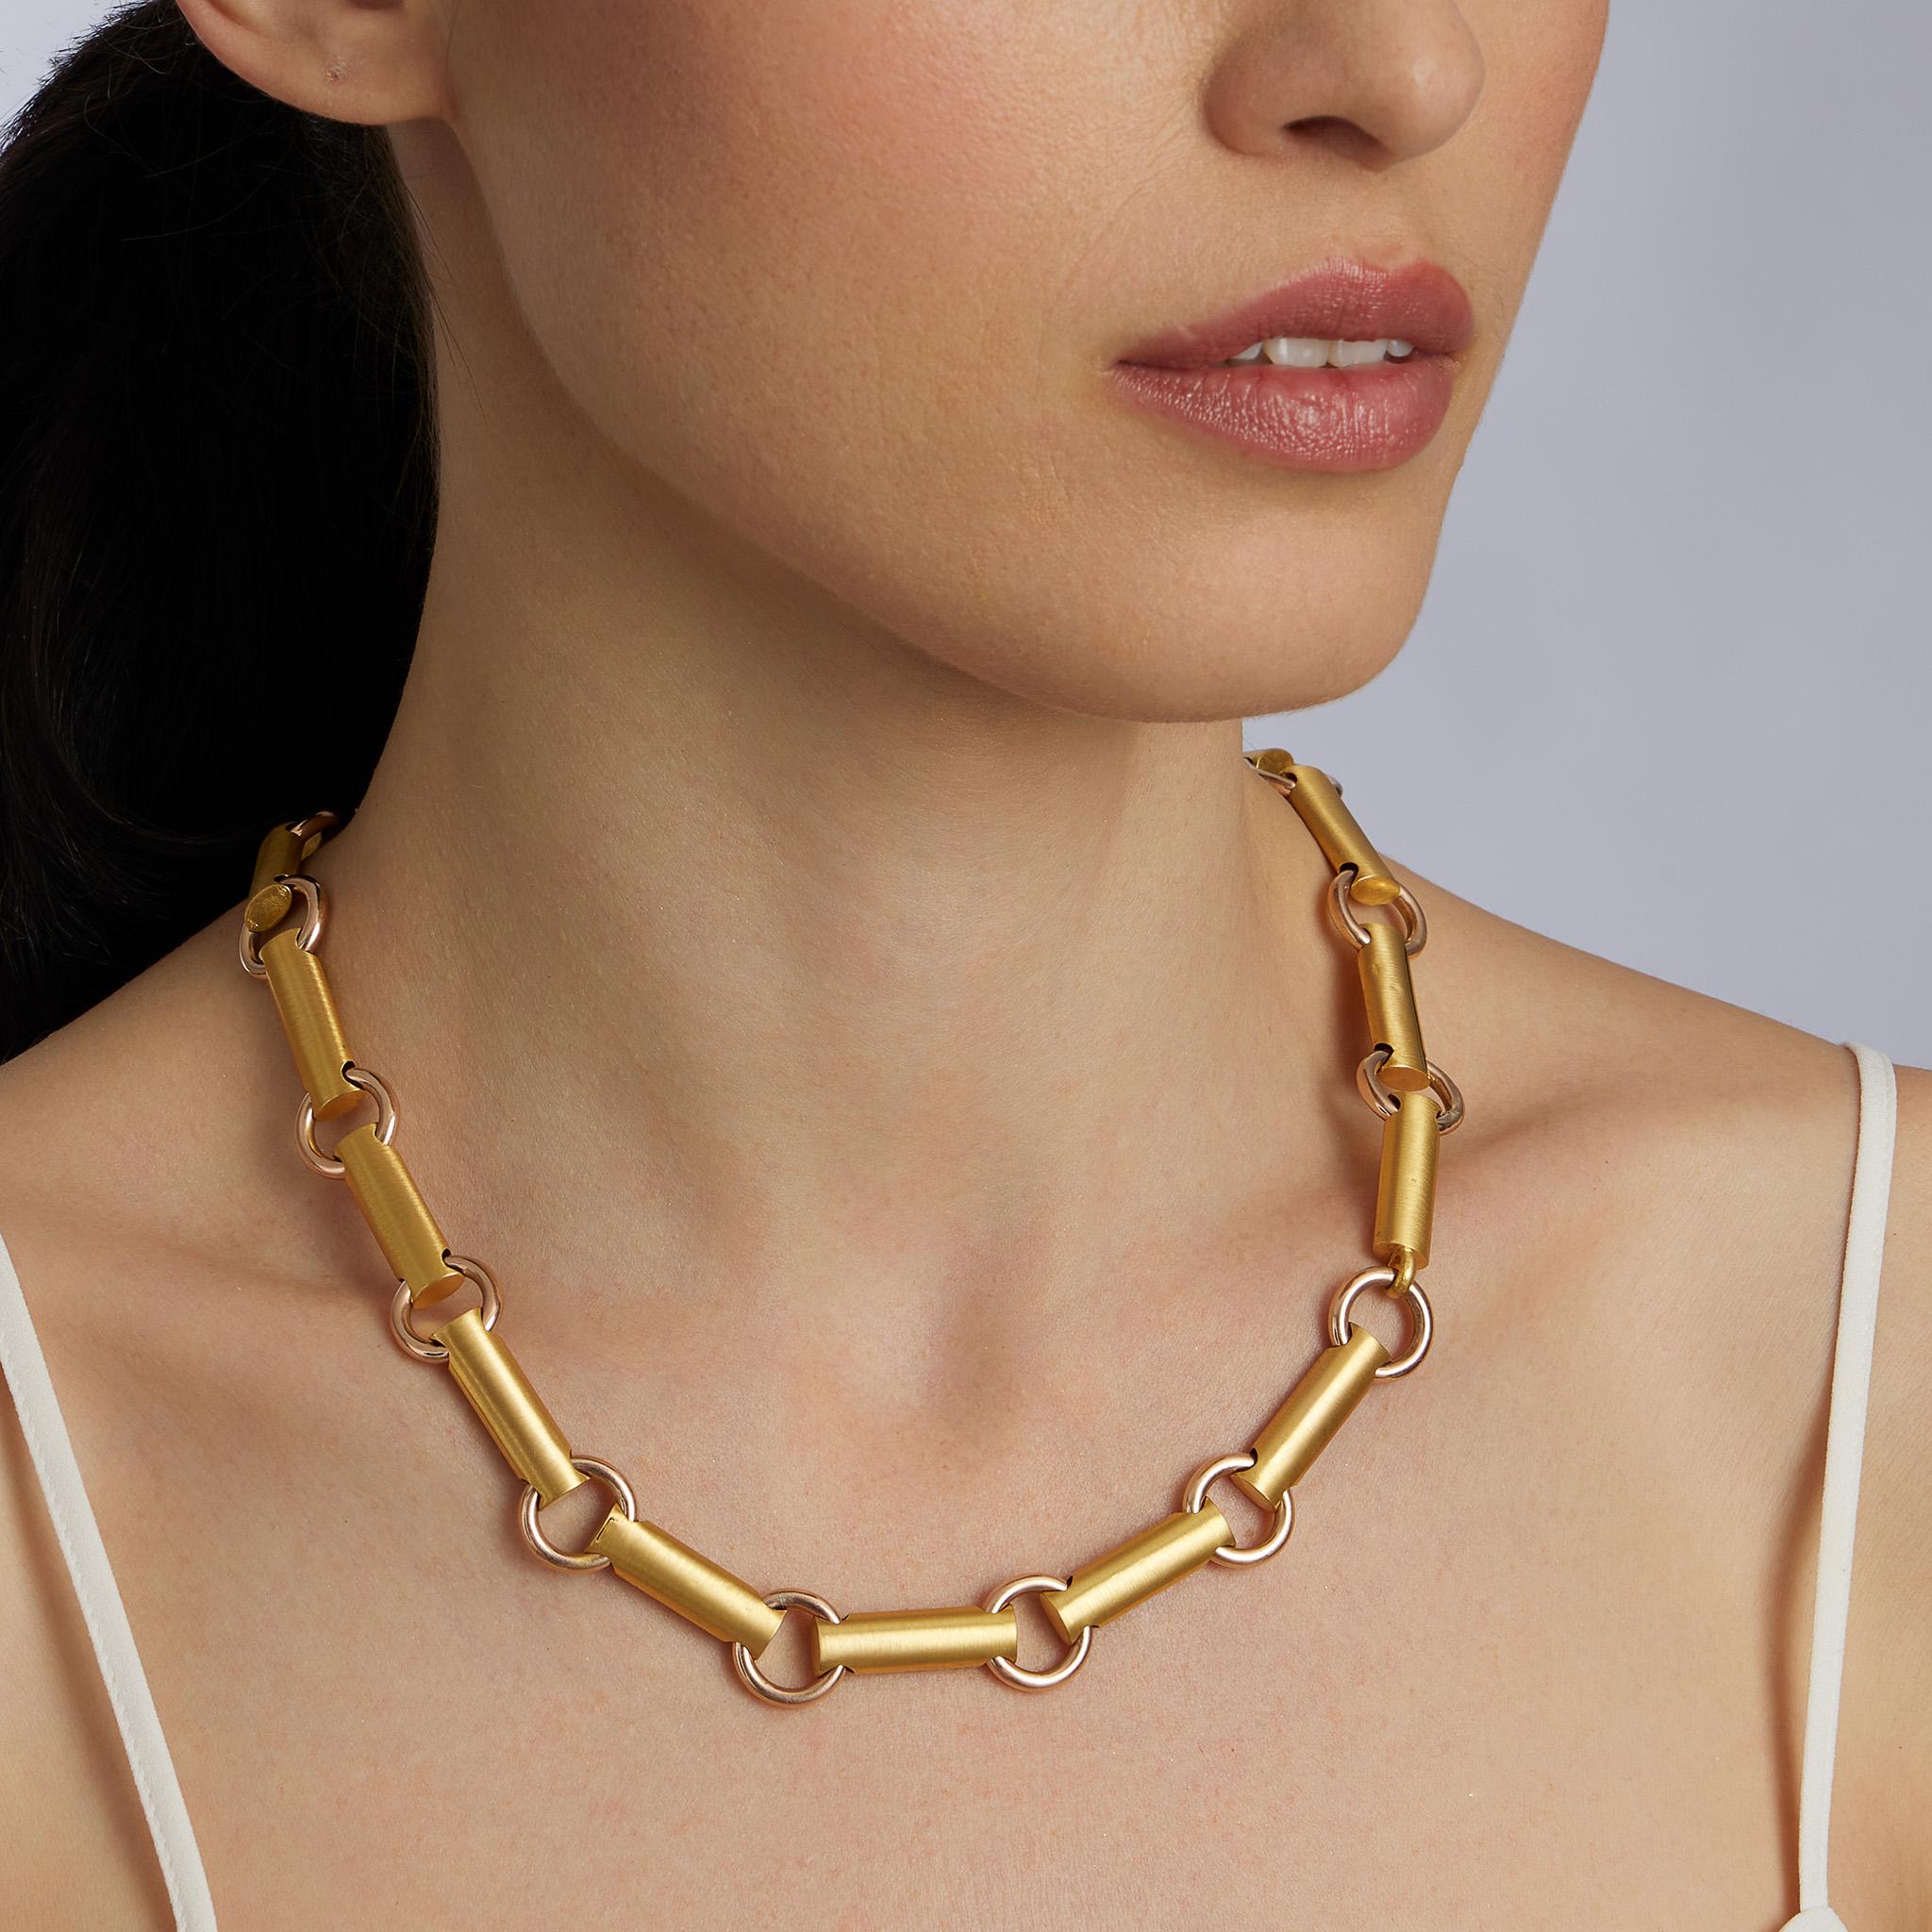 Made in England around 1880, this necklace is composed of bi-color 15K gold. The 20 inch geometric chain is composed of plain polished rose-gold circular links interspersed with brushed yellow gold cylindrical bar links. Light and supremely